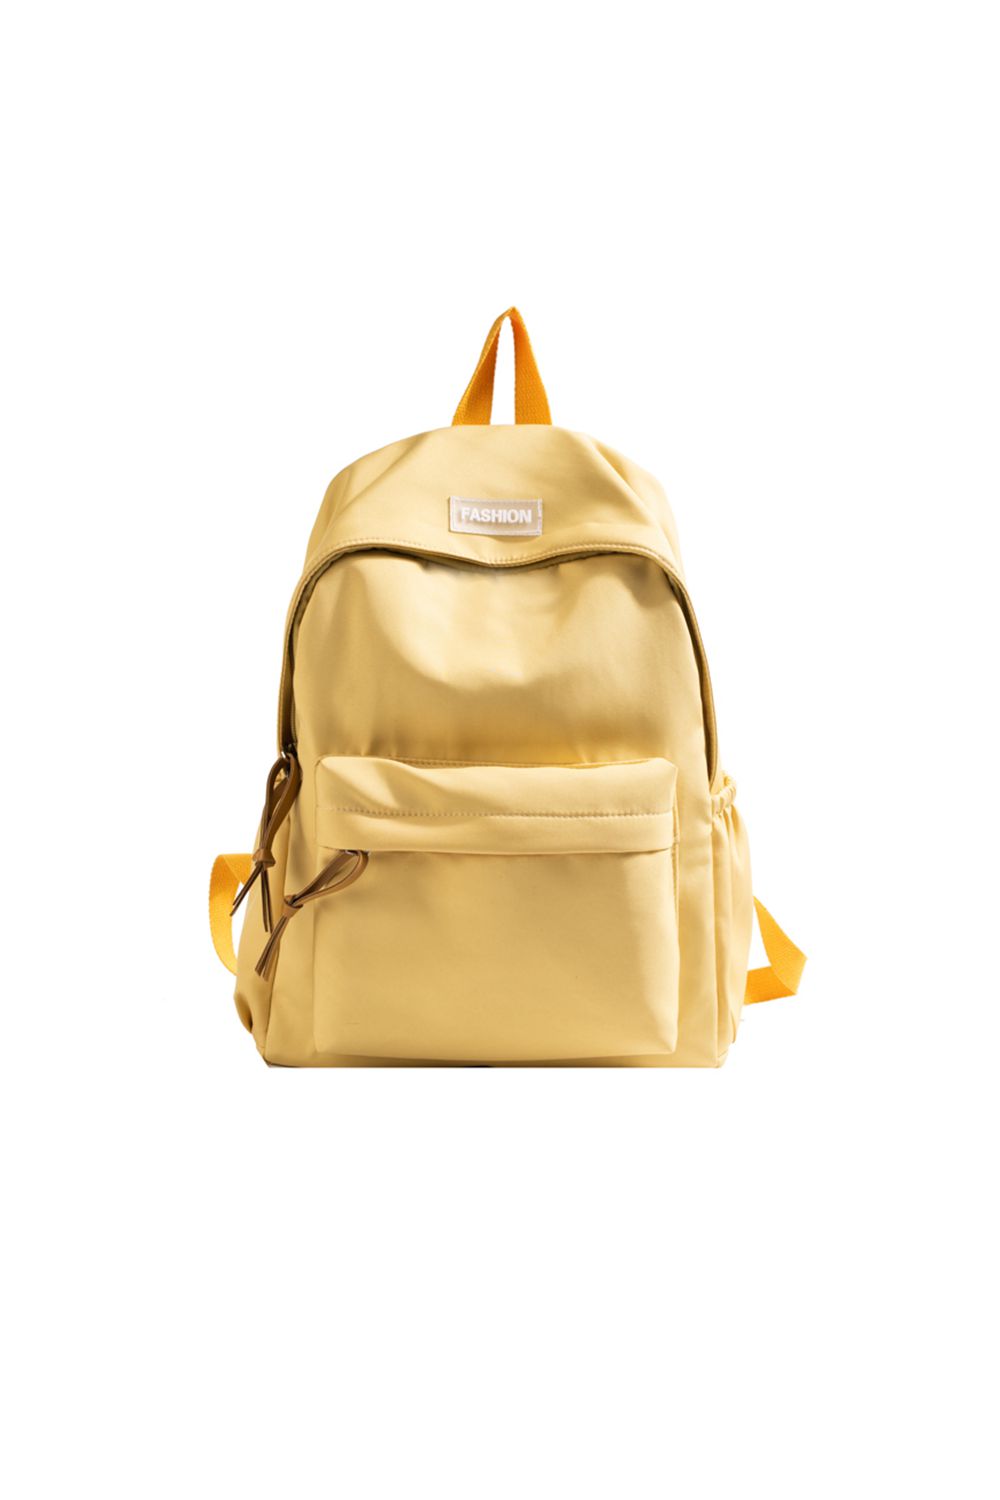 Adored FASHION Polyester Backpack